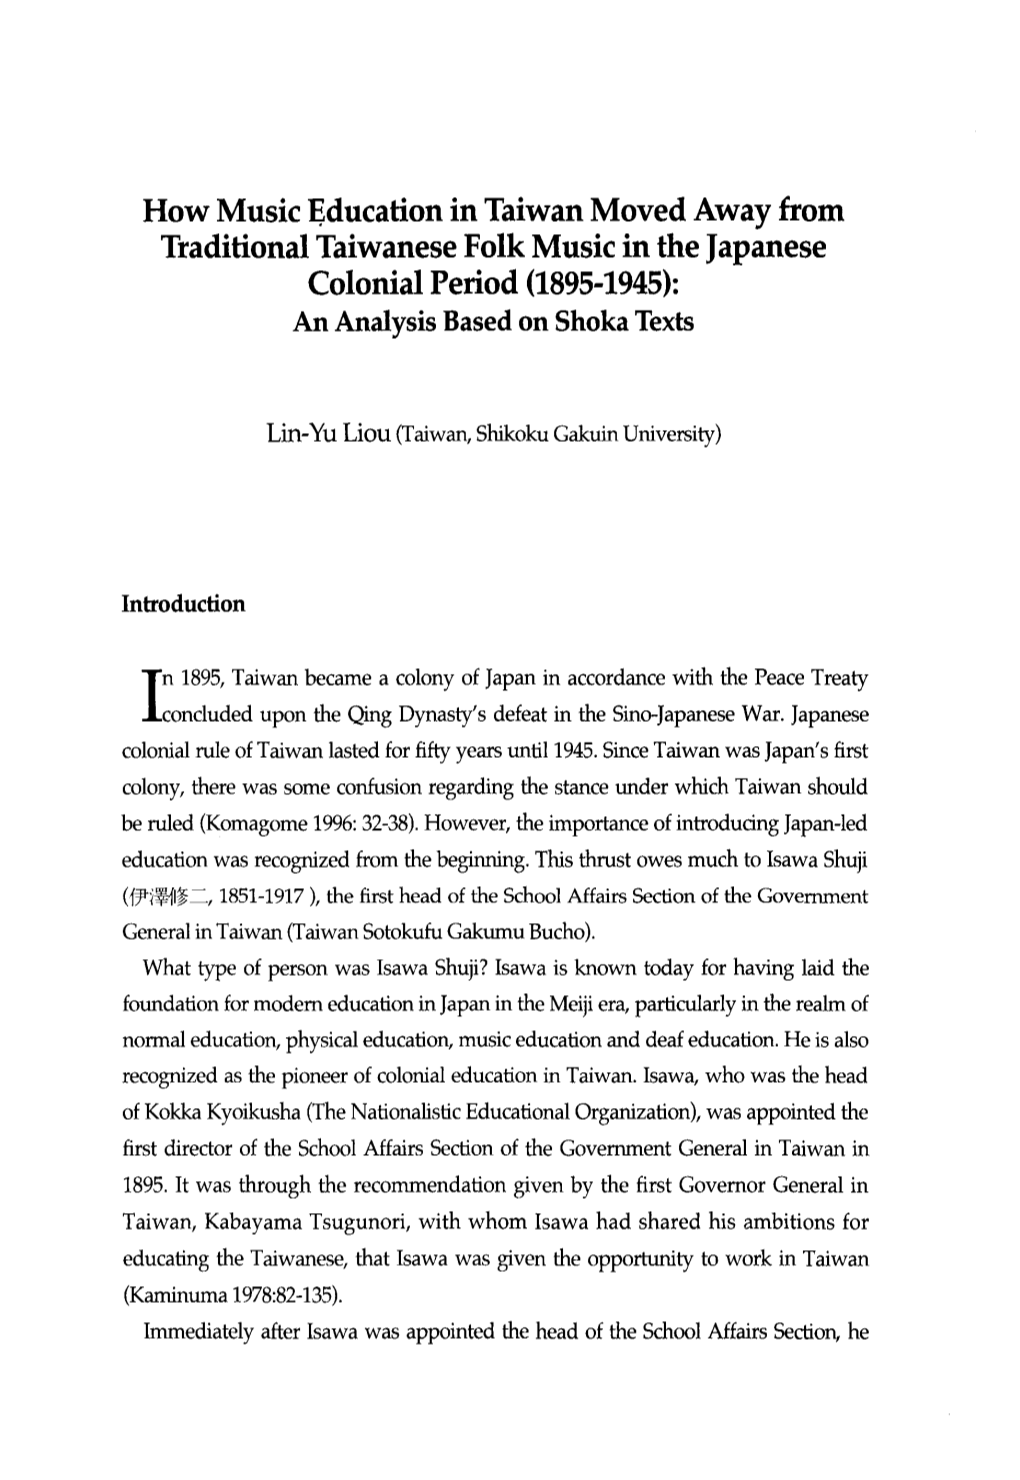 How Music Education in Taiwan Moved Away from Traditional Taiwanese Folk Music in the Japanese Colonial Period (1895-1945): an Analysis Based on Shoka Texts